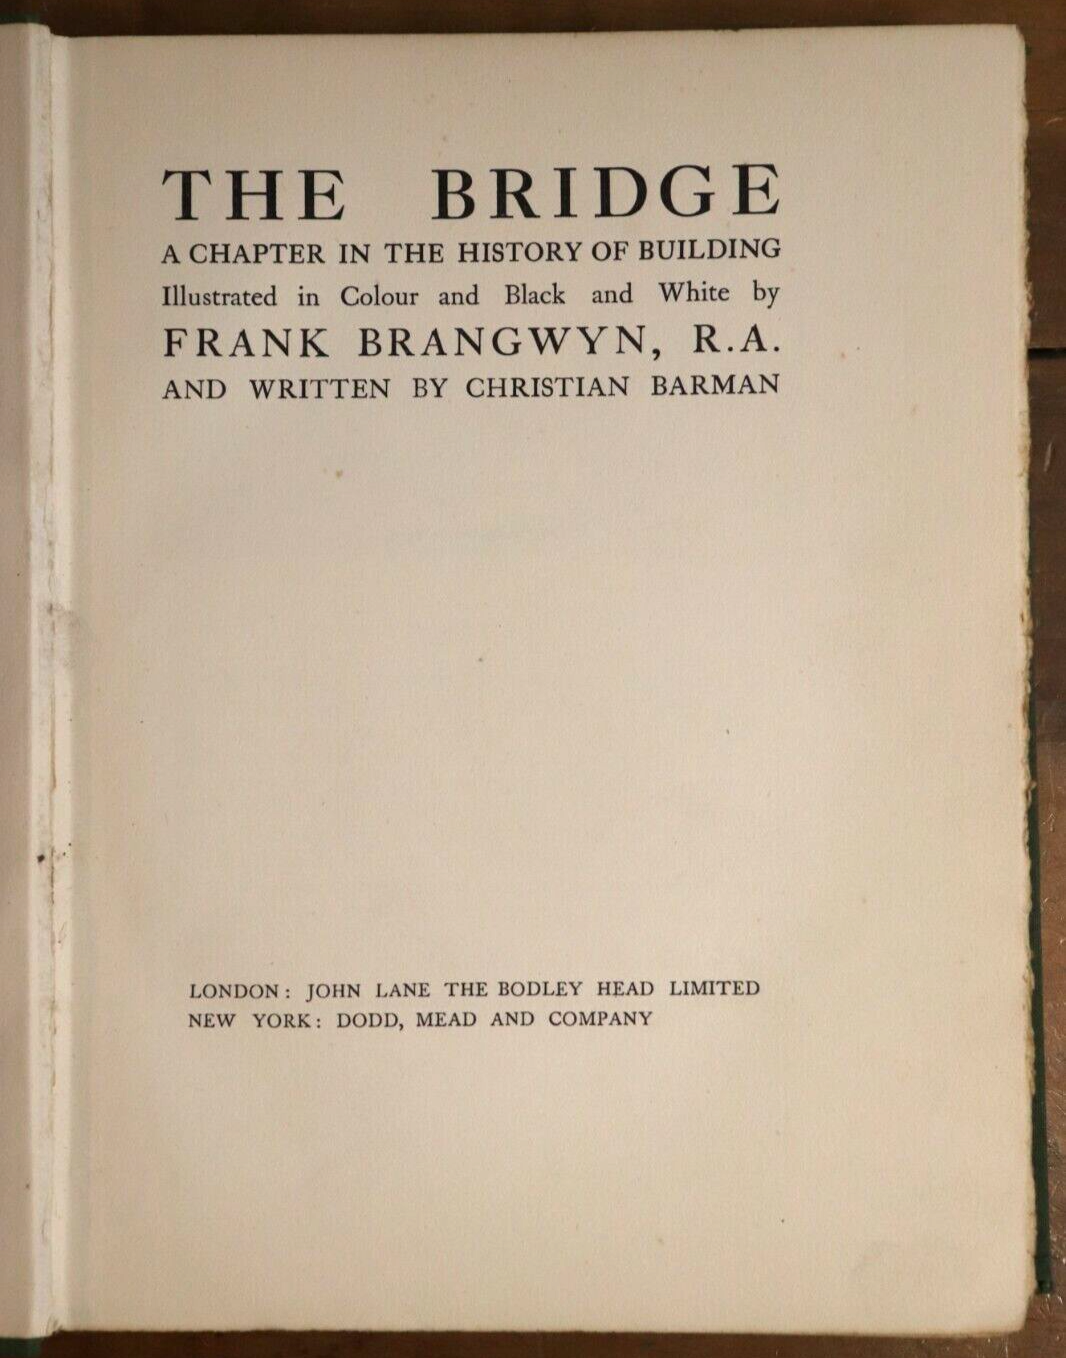 1926 The Bridge by Frank Brangwyn 1st Edition Antique Architecture History Book